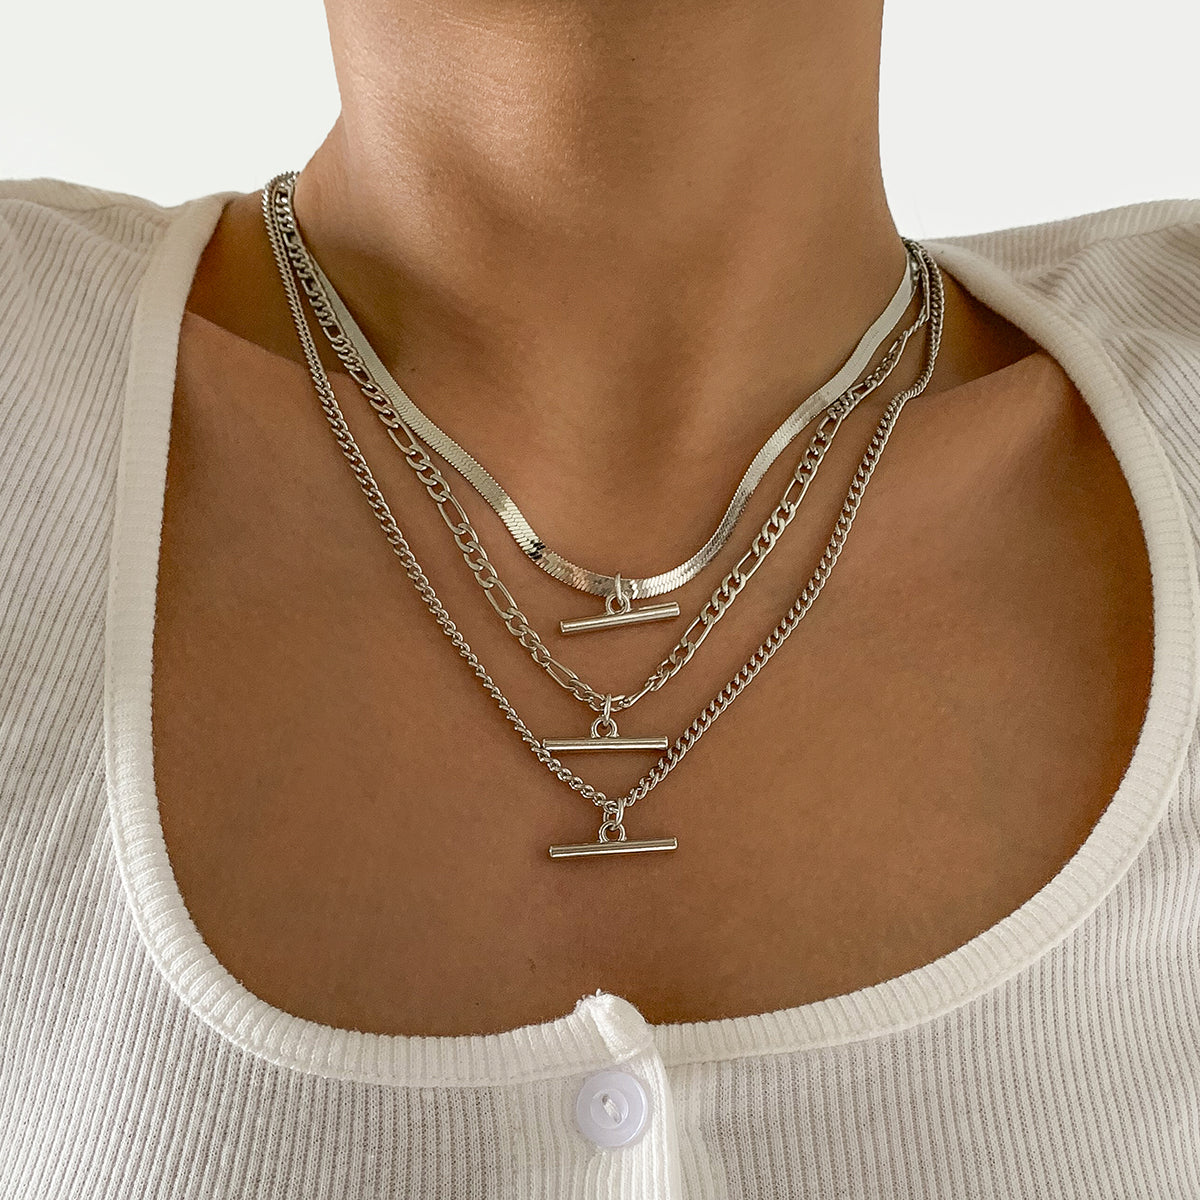 Silver-Plated Snake Chain Bar Pendant Necklace Set